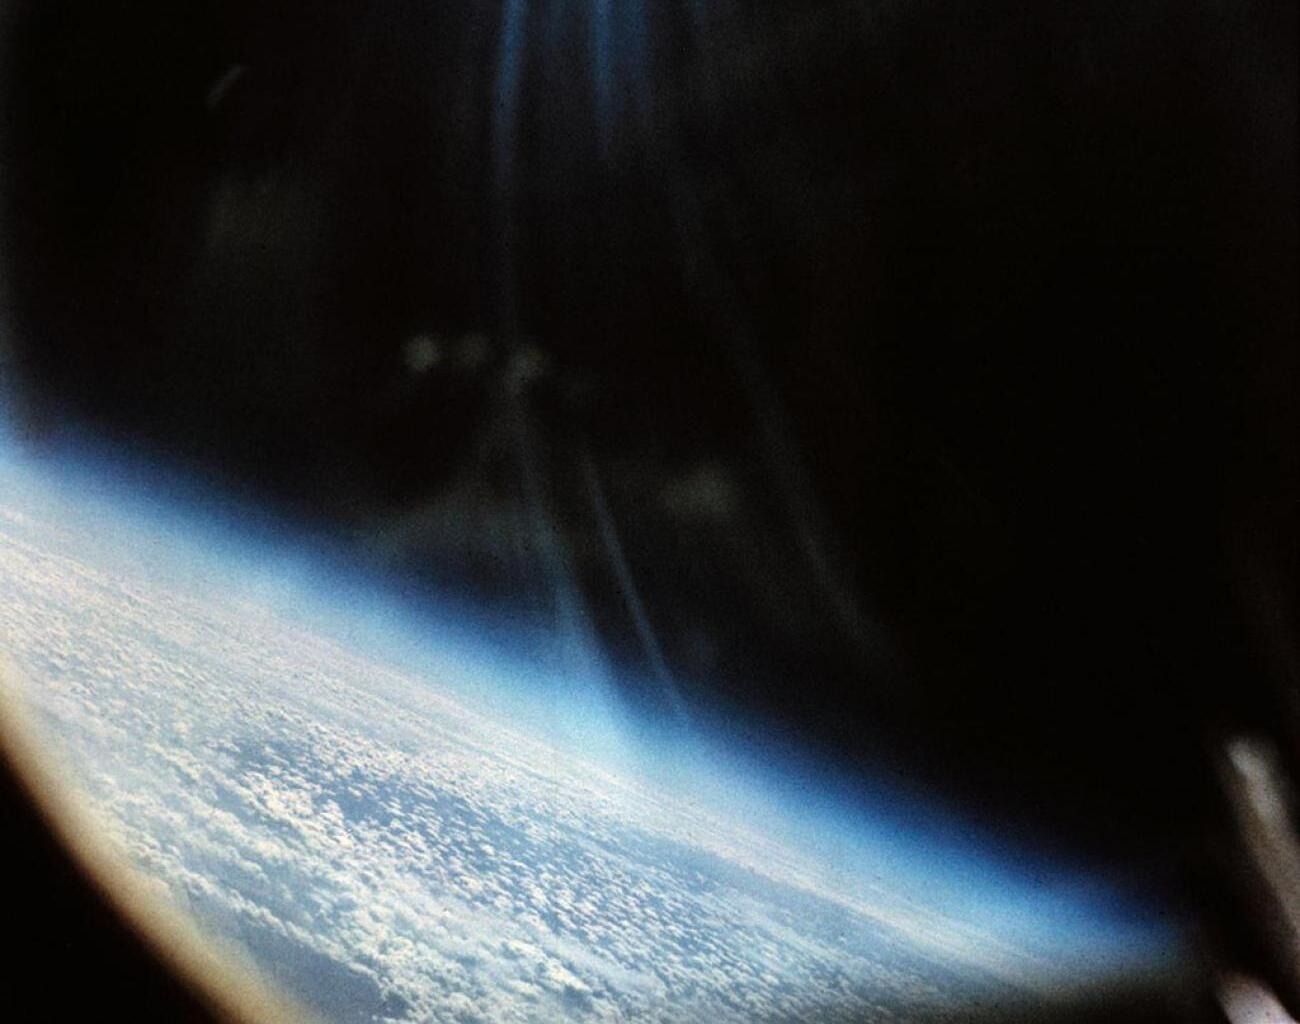 a view of Earth from space, as seen in the Mercury-Redstone 2 capsule